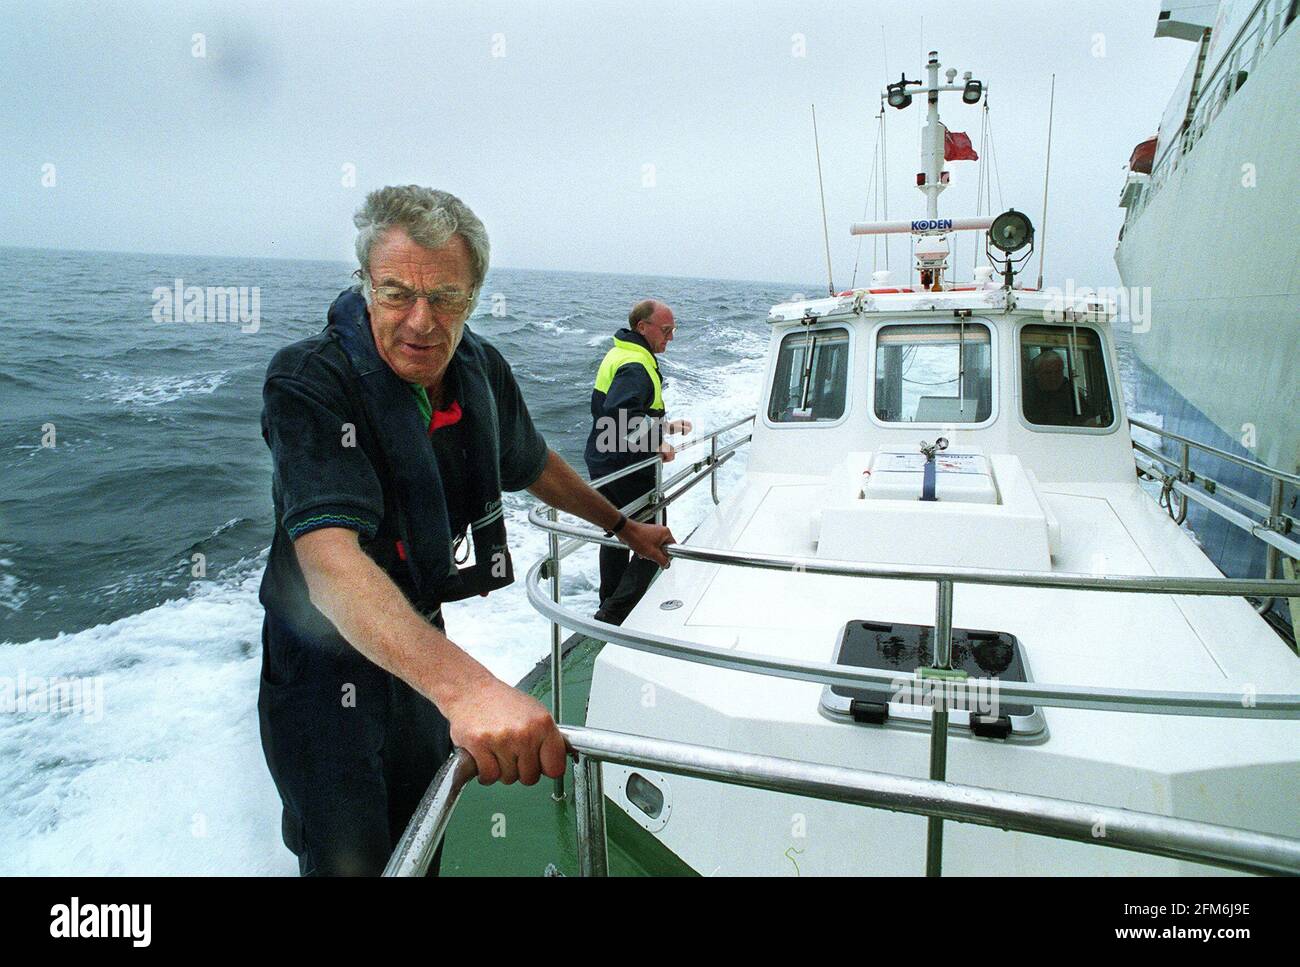 Derek Goodban on the  dover patrol launch afterpicking up the dover pilot from a panamanian freightera few miles out in the  channel.. Stock Photo